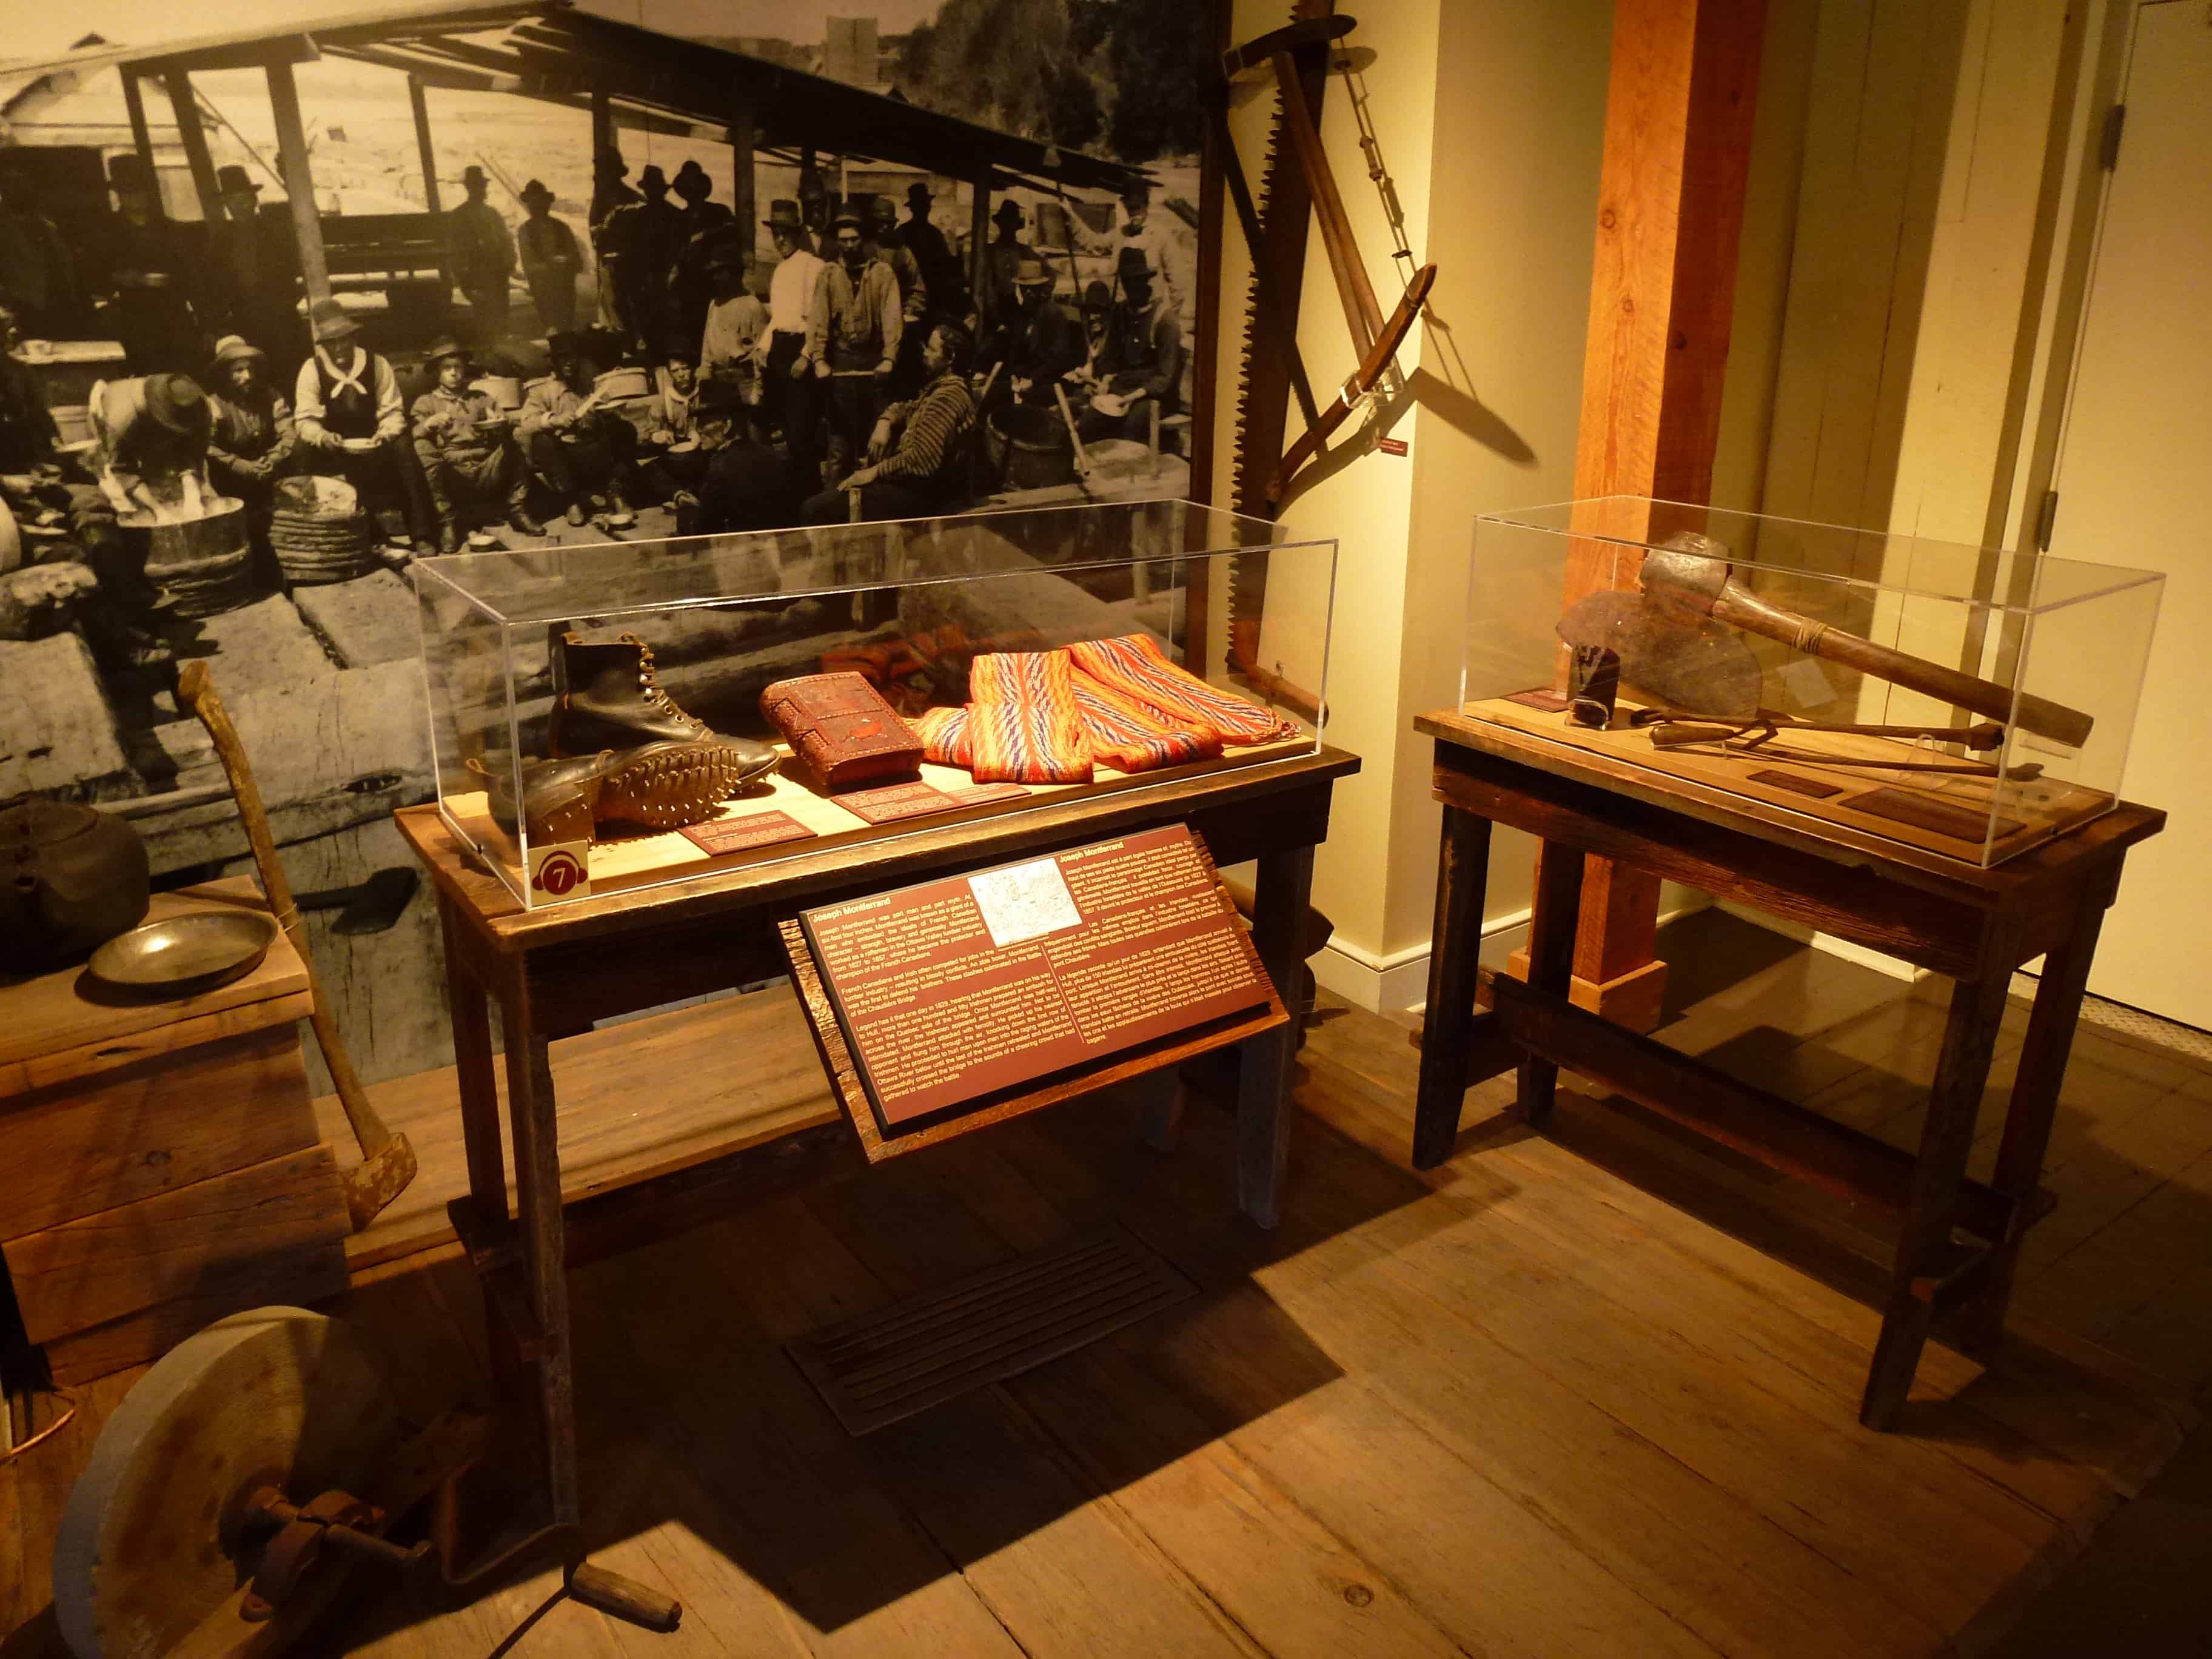 An exhibit in the Bytown Museum